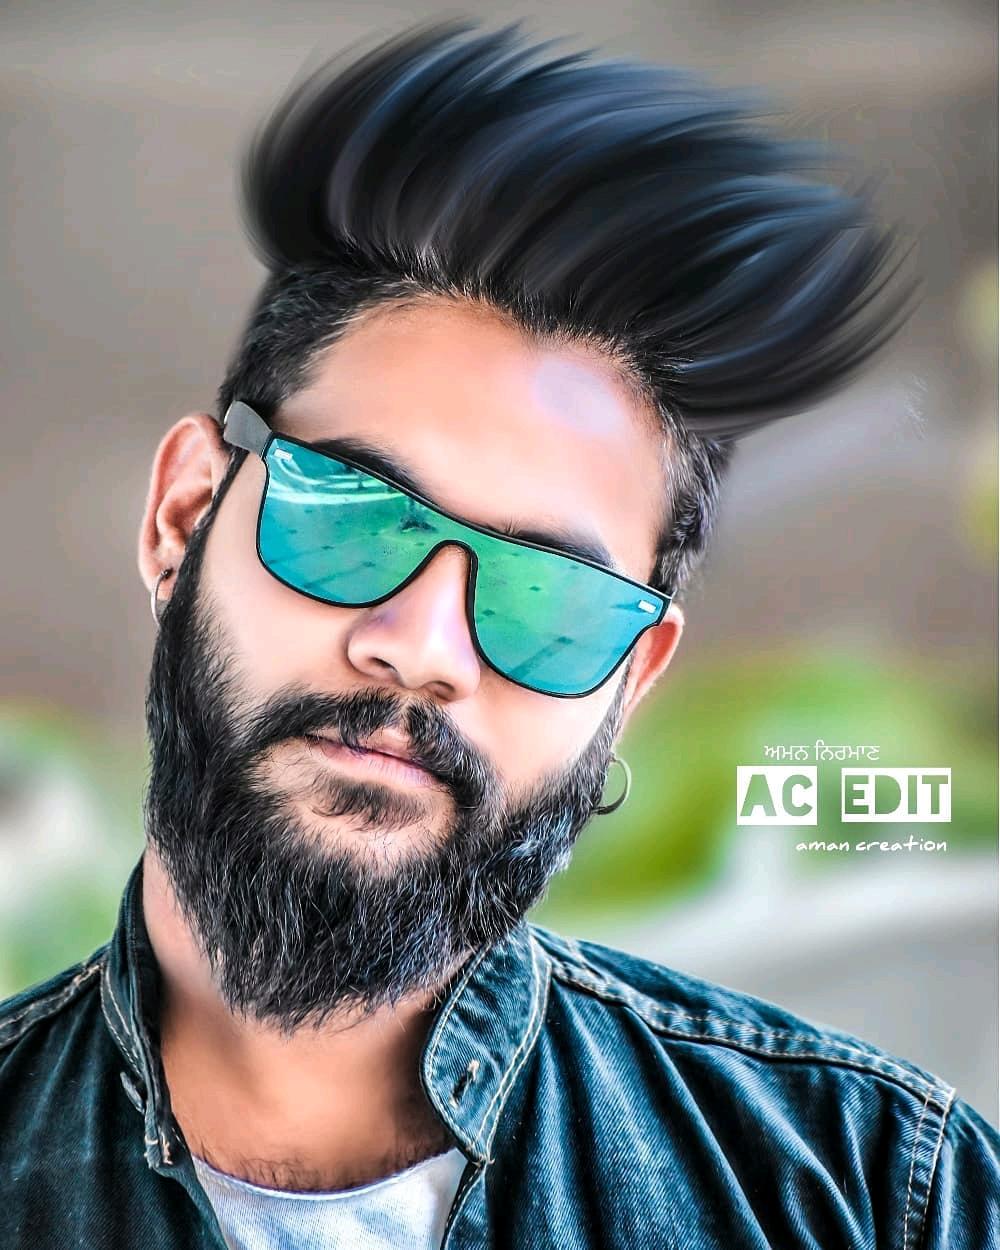 CB Hair Png - Best Hair Style Png Images APK  for Android – Download CB  Hair Png - Best Hair Style Png Images APK Latest Version from 